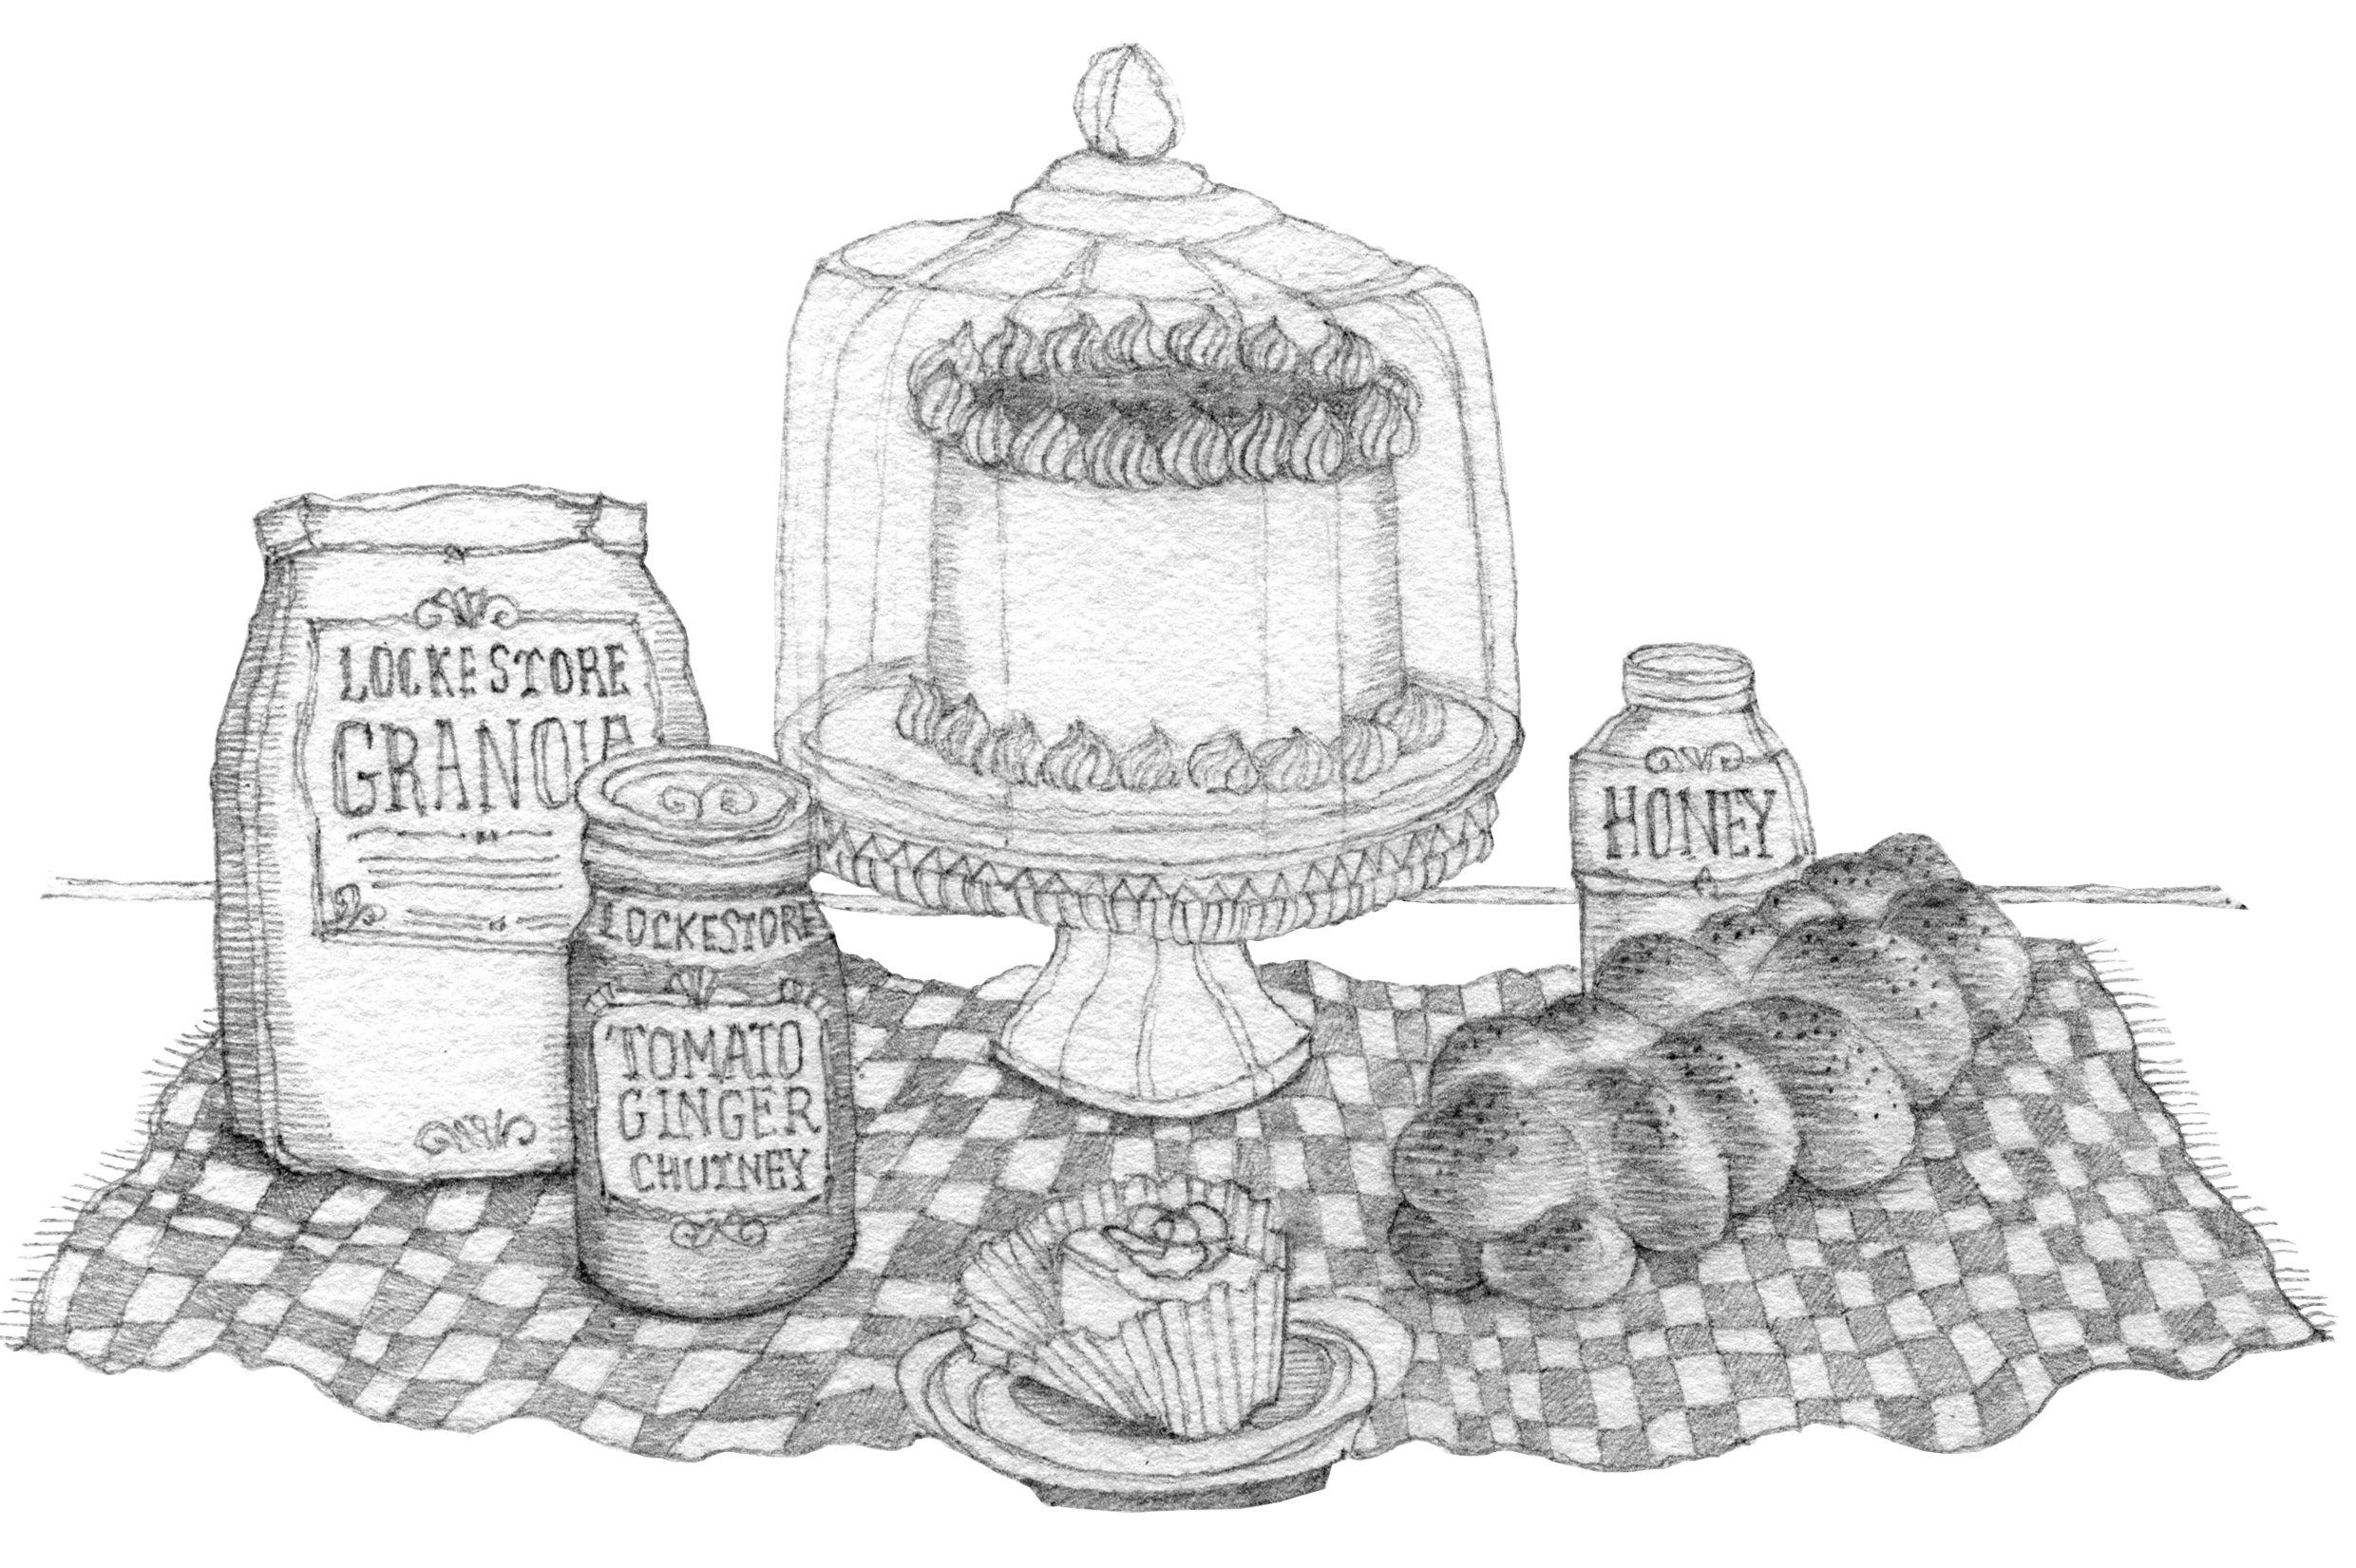 Pencil illustration of grocery and bakery items from Locke Country Store in Millwood Virginia